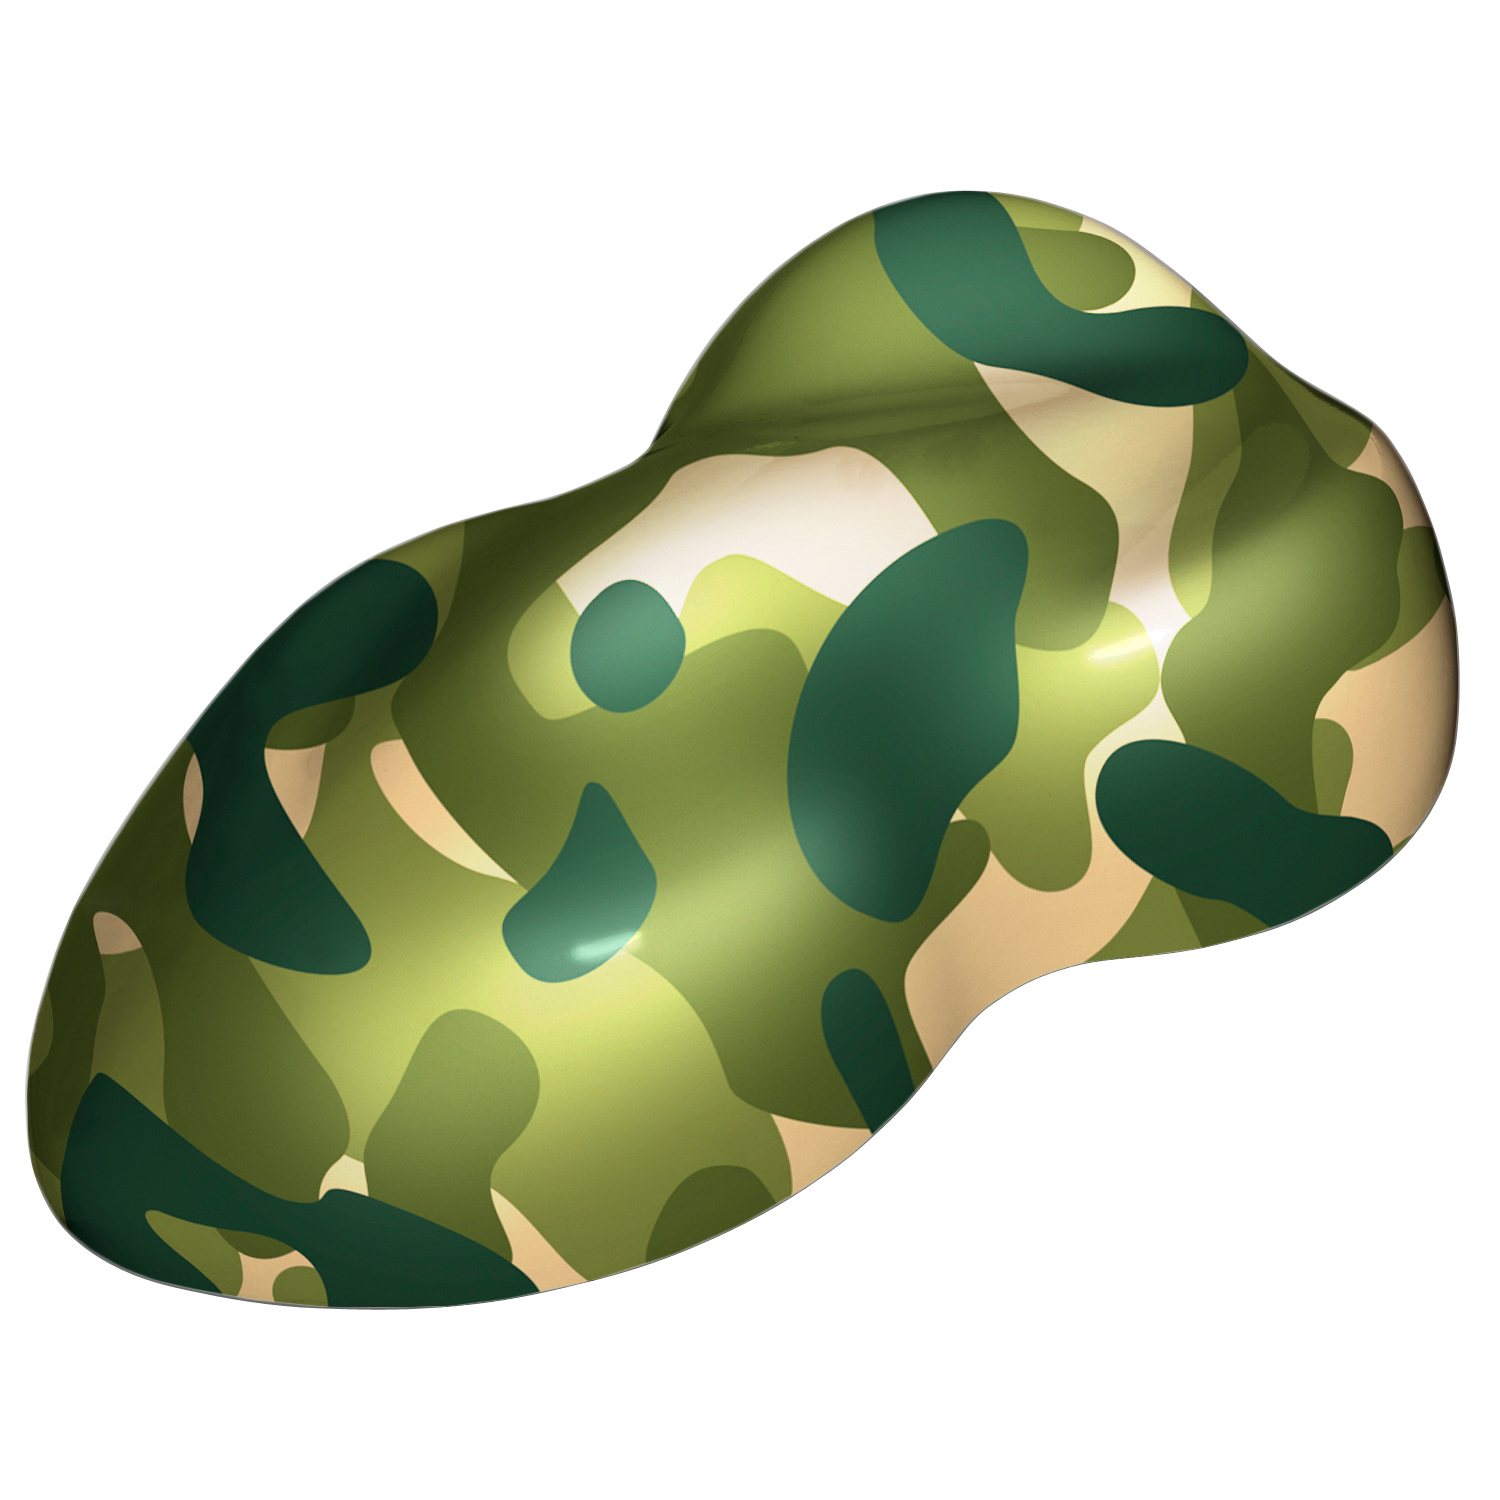 Camouflage "Military